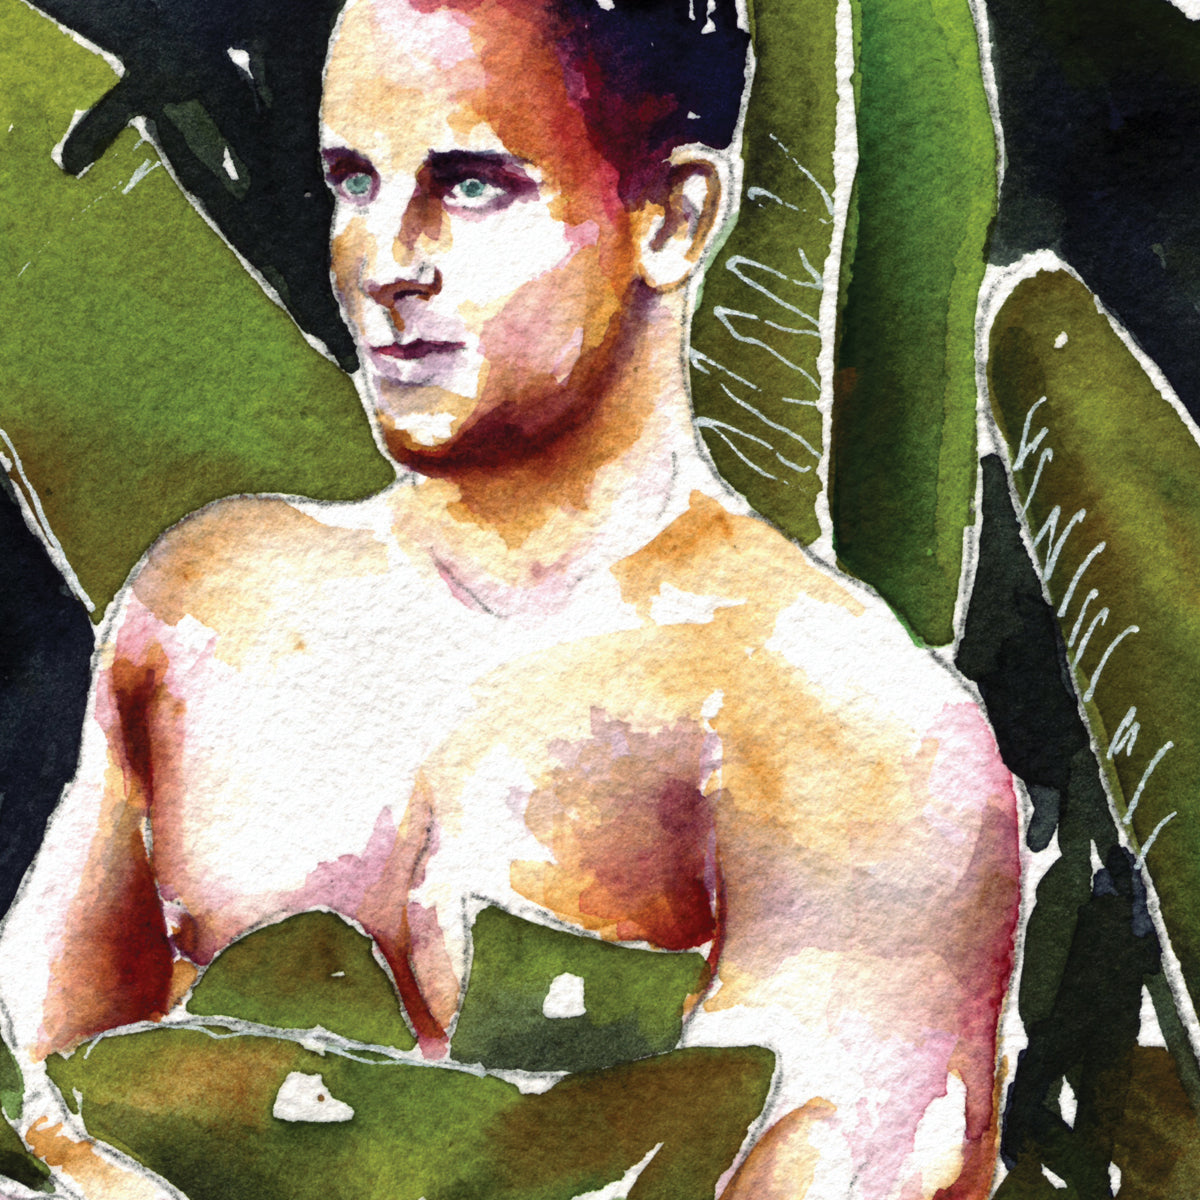 Verdant Veil: Muscular Male Shielded by Palm Leaves - Giclee Art Print